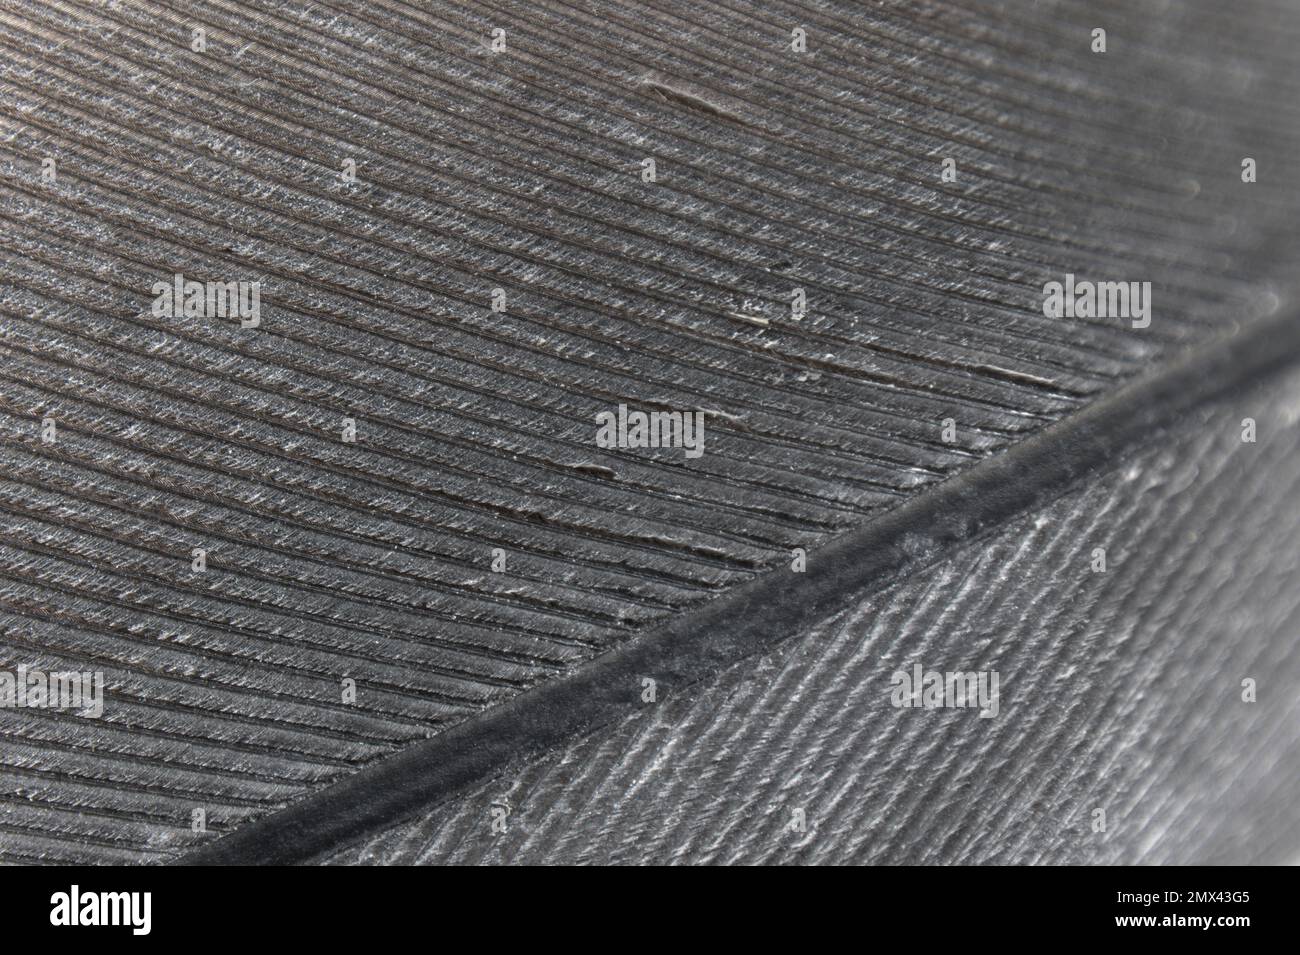 Image-filling macro shot of a part of the feather of a gray parrot. High magnification Stock Photo